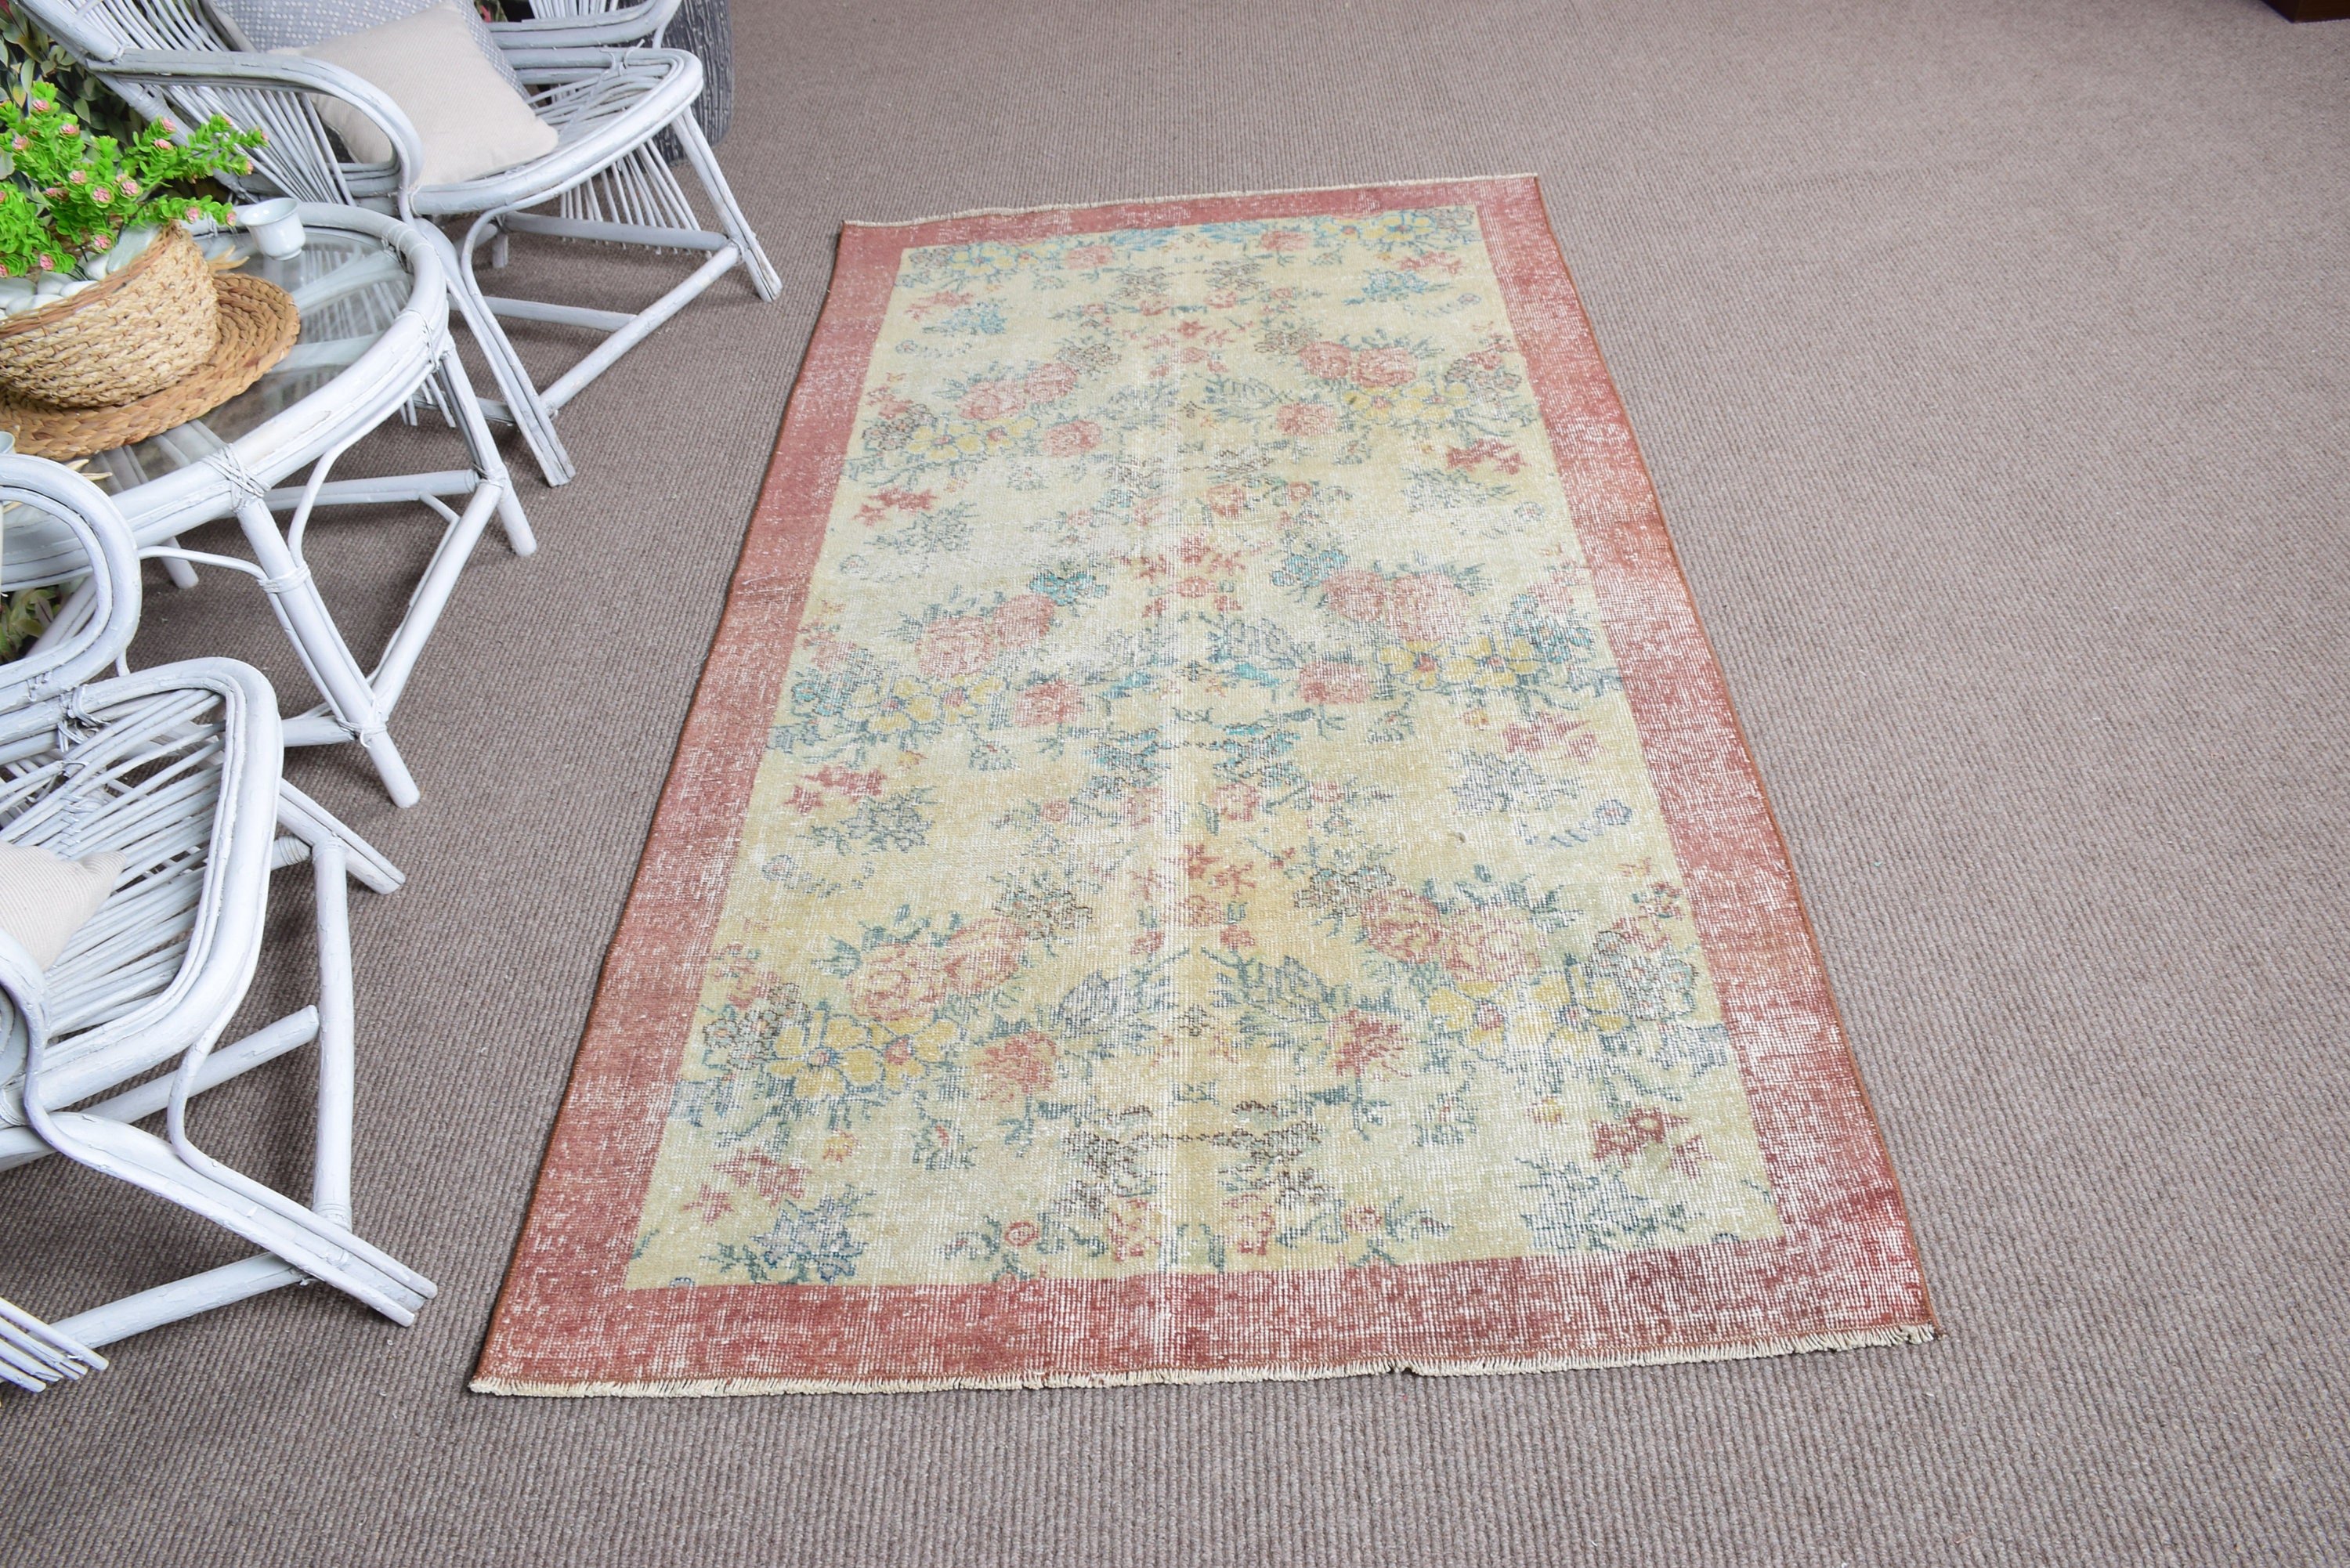 3.5x6.6 ft Accent Rug, Oushak Rug, Eclectic Rug, Entry Rugs, Brown Anatolian Rugs, Home Decor Rug, Vintage Rugs, Bedroom Rugs, Turkish Rugs